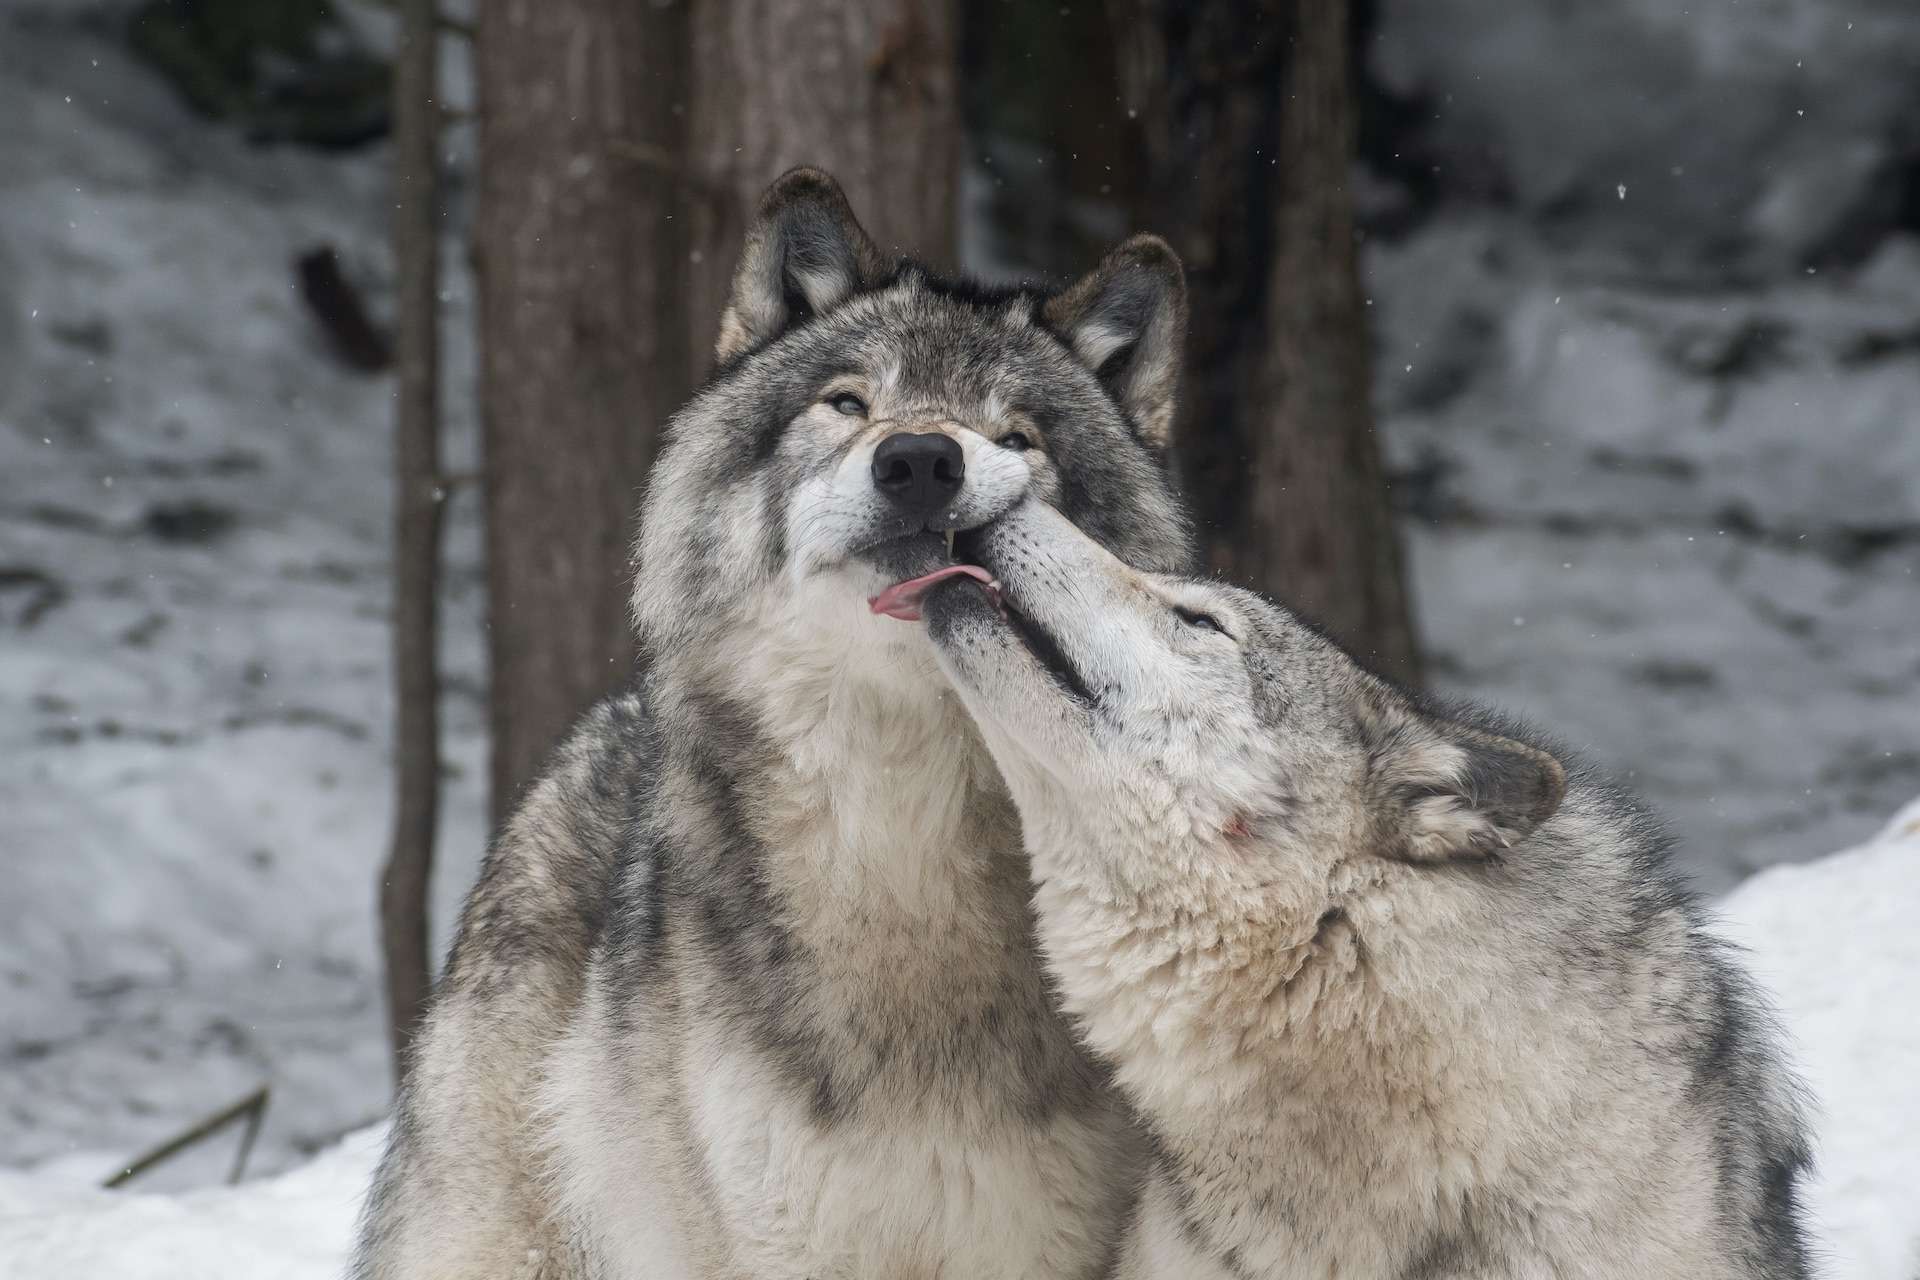 Landscape photo of two grey wolves playing in a snowy forest. One of them is licking the other one's face. Shot in Montebello, Quebec, Canada.